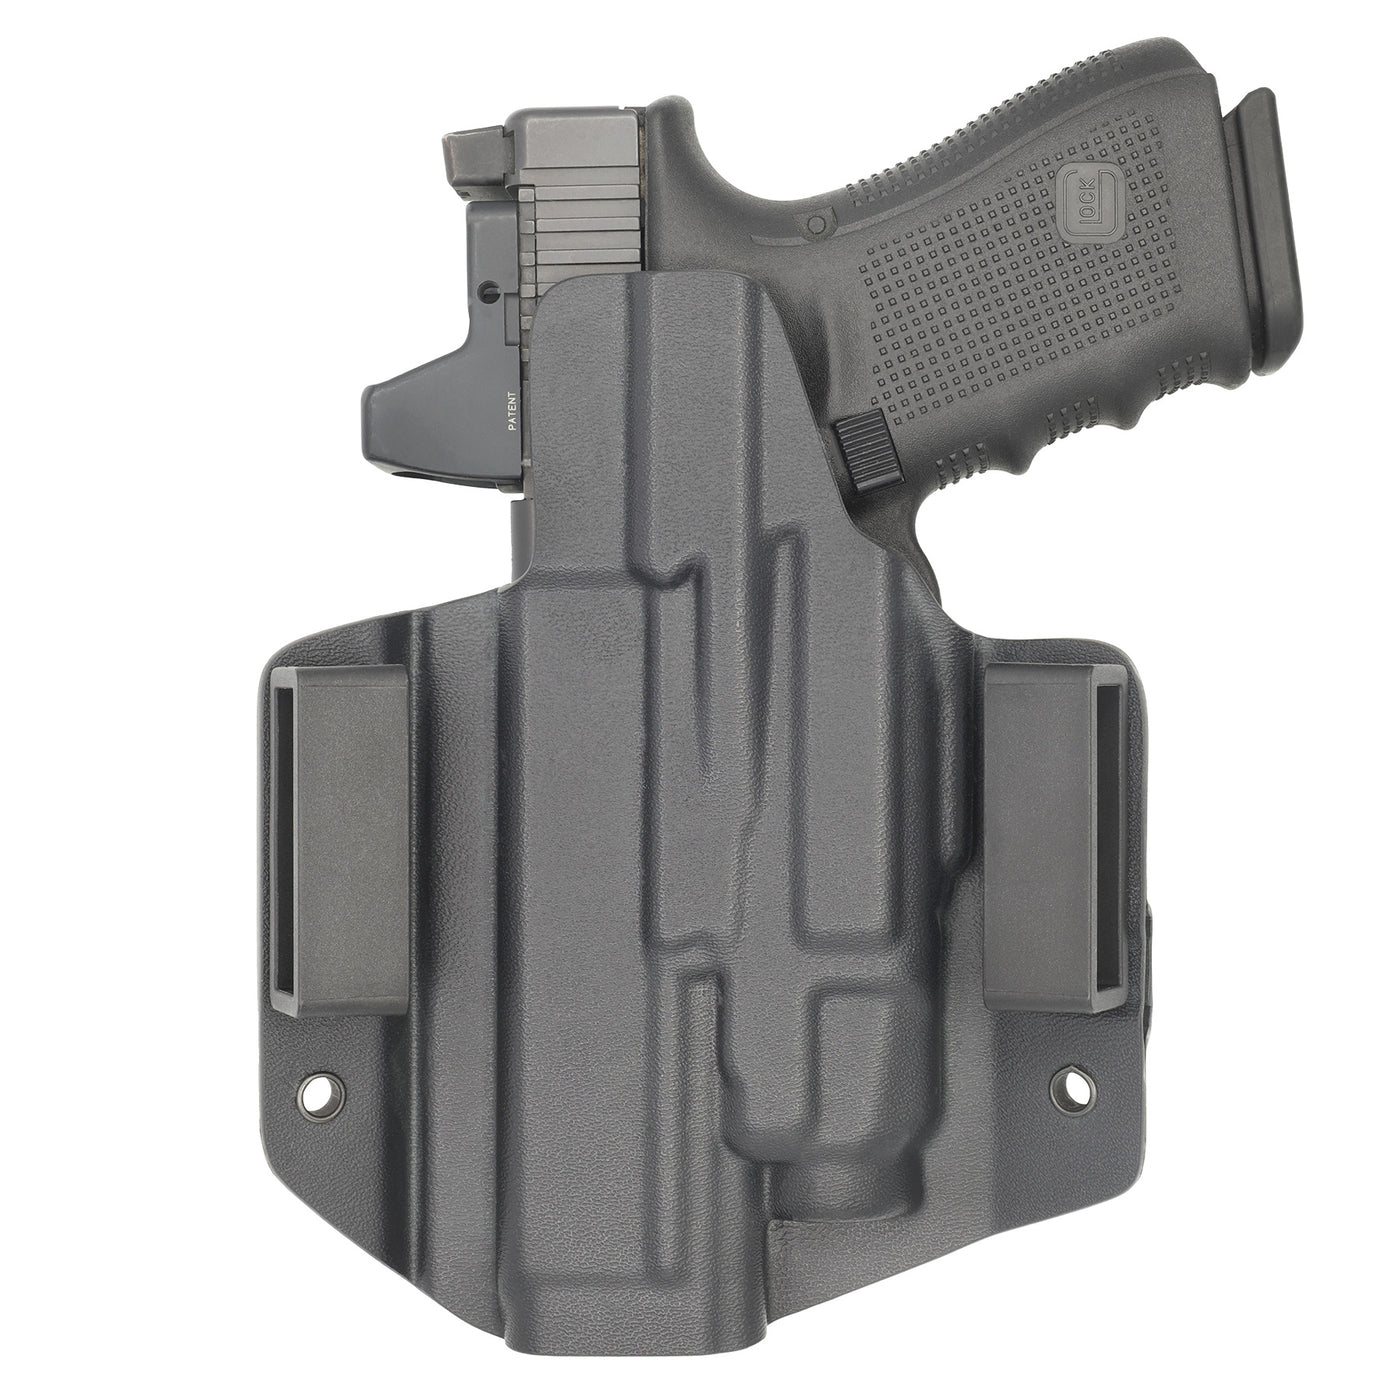 C&G Holsters custom OWB Tactical OZ9/c streamlight TLR7/a in holstered position back view